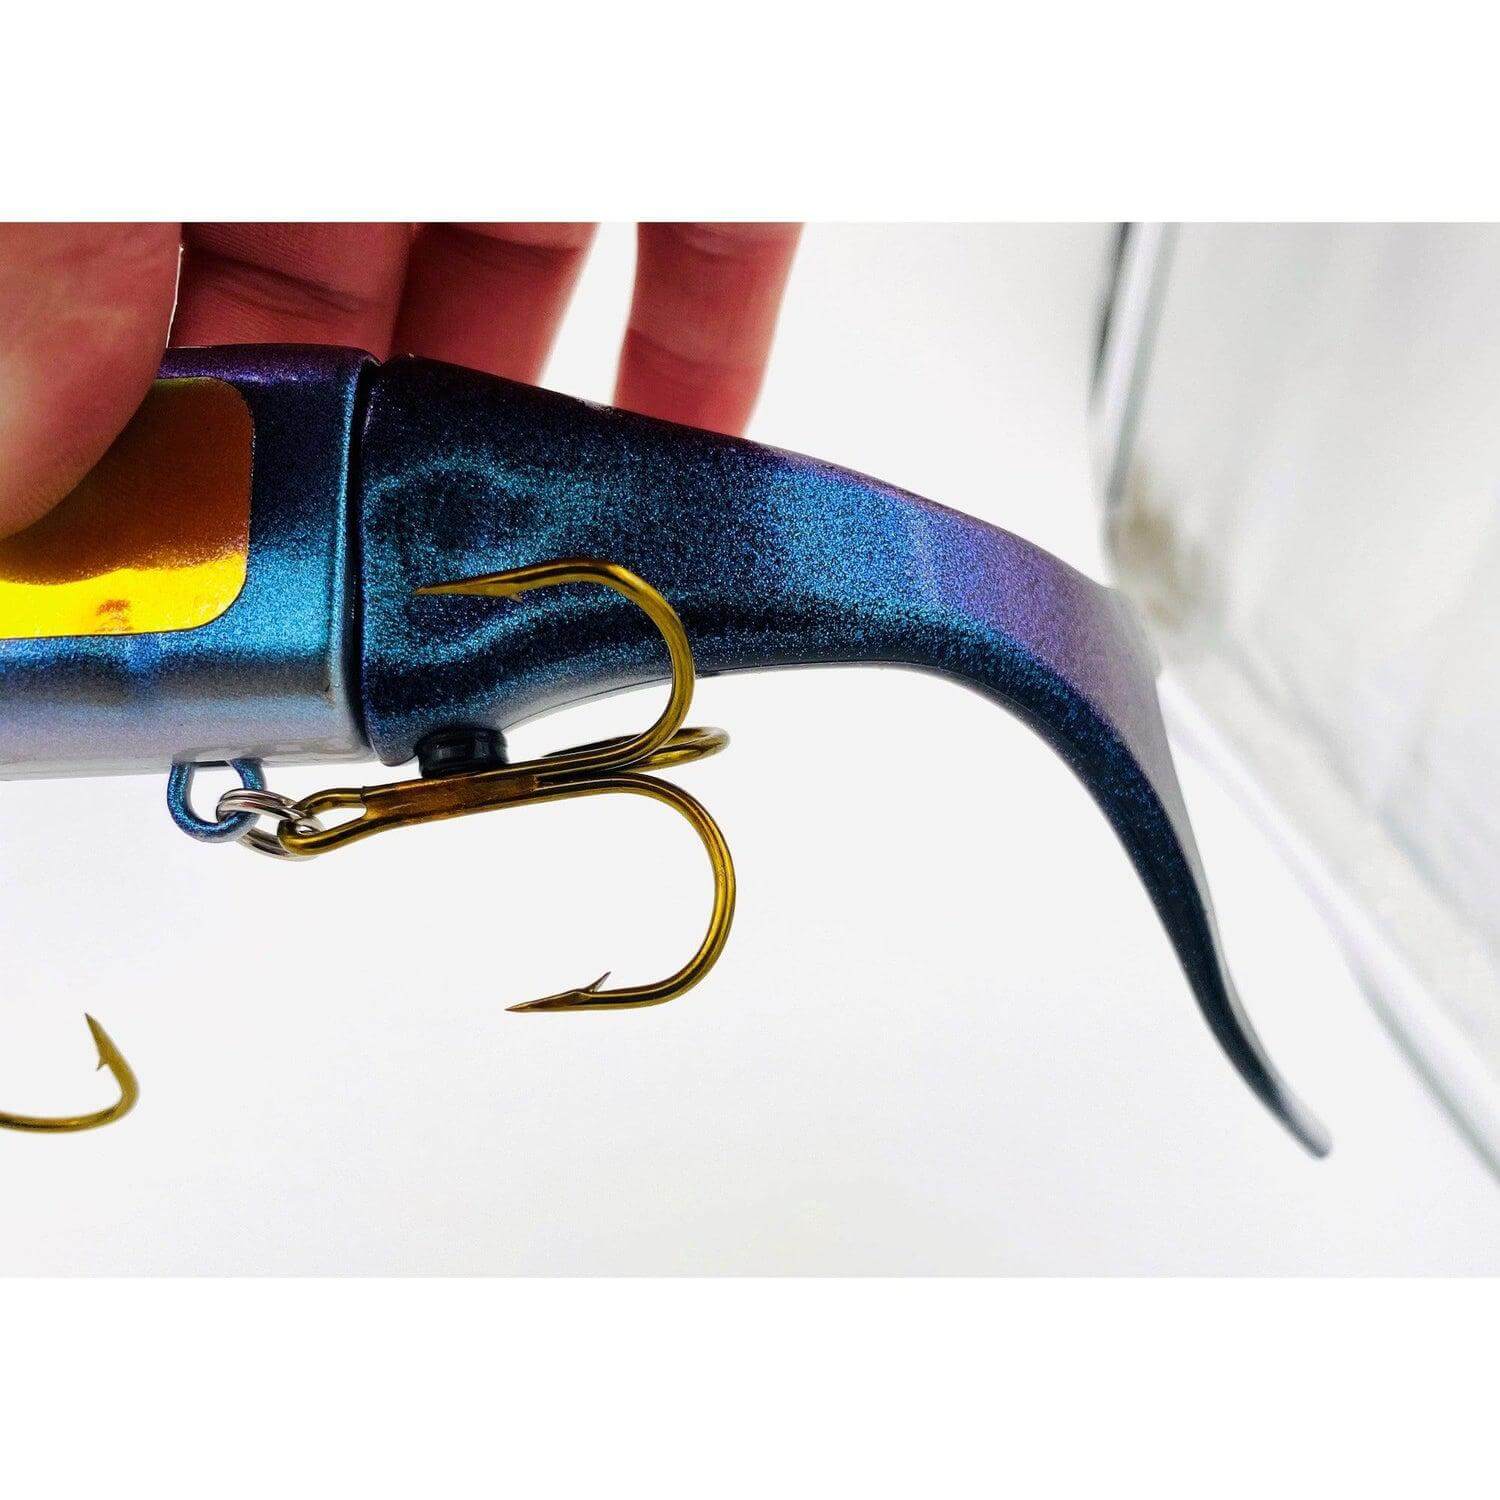 View of Lures_Add-on Musky Innovations Pro Magnets available at EZOKO Pike and Musky Shop